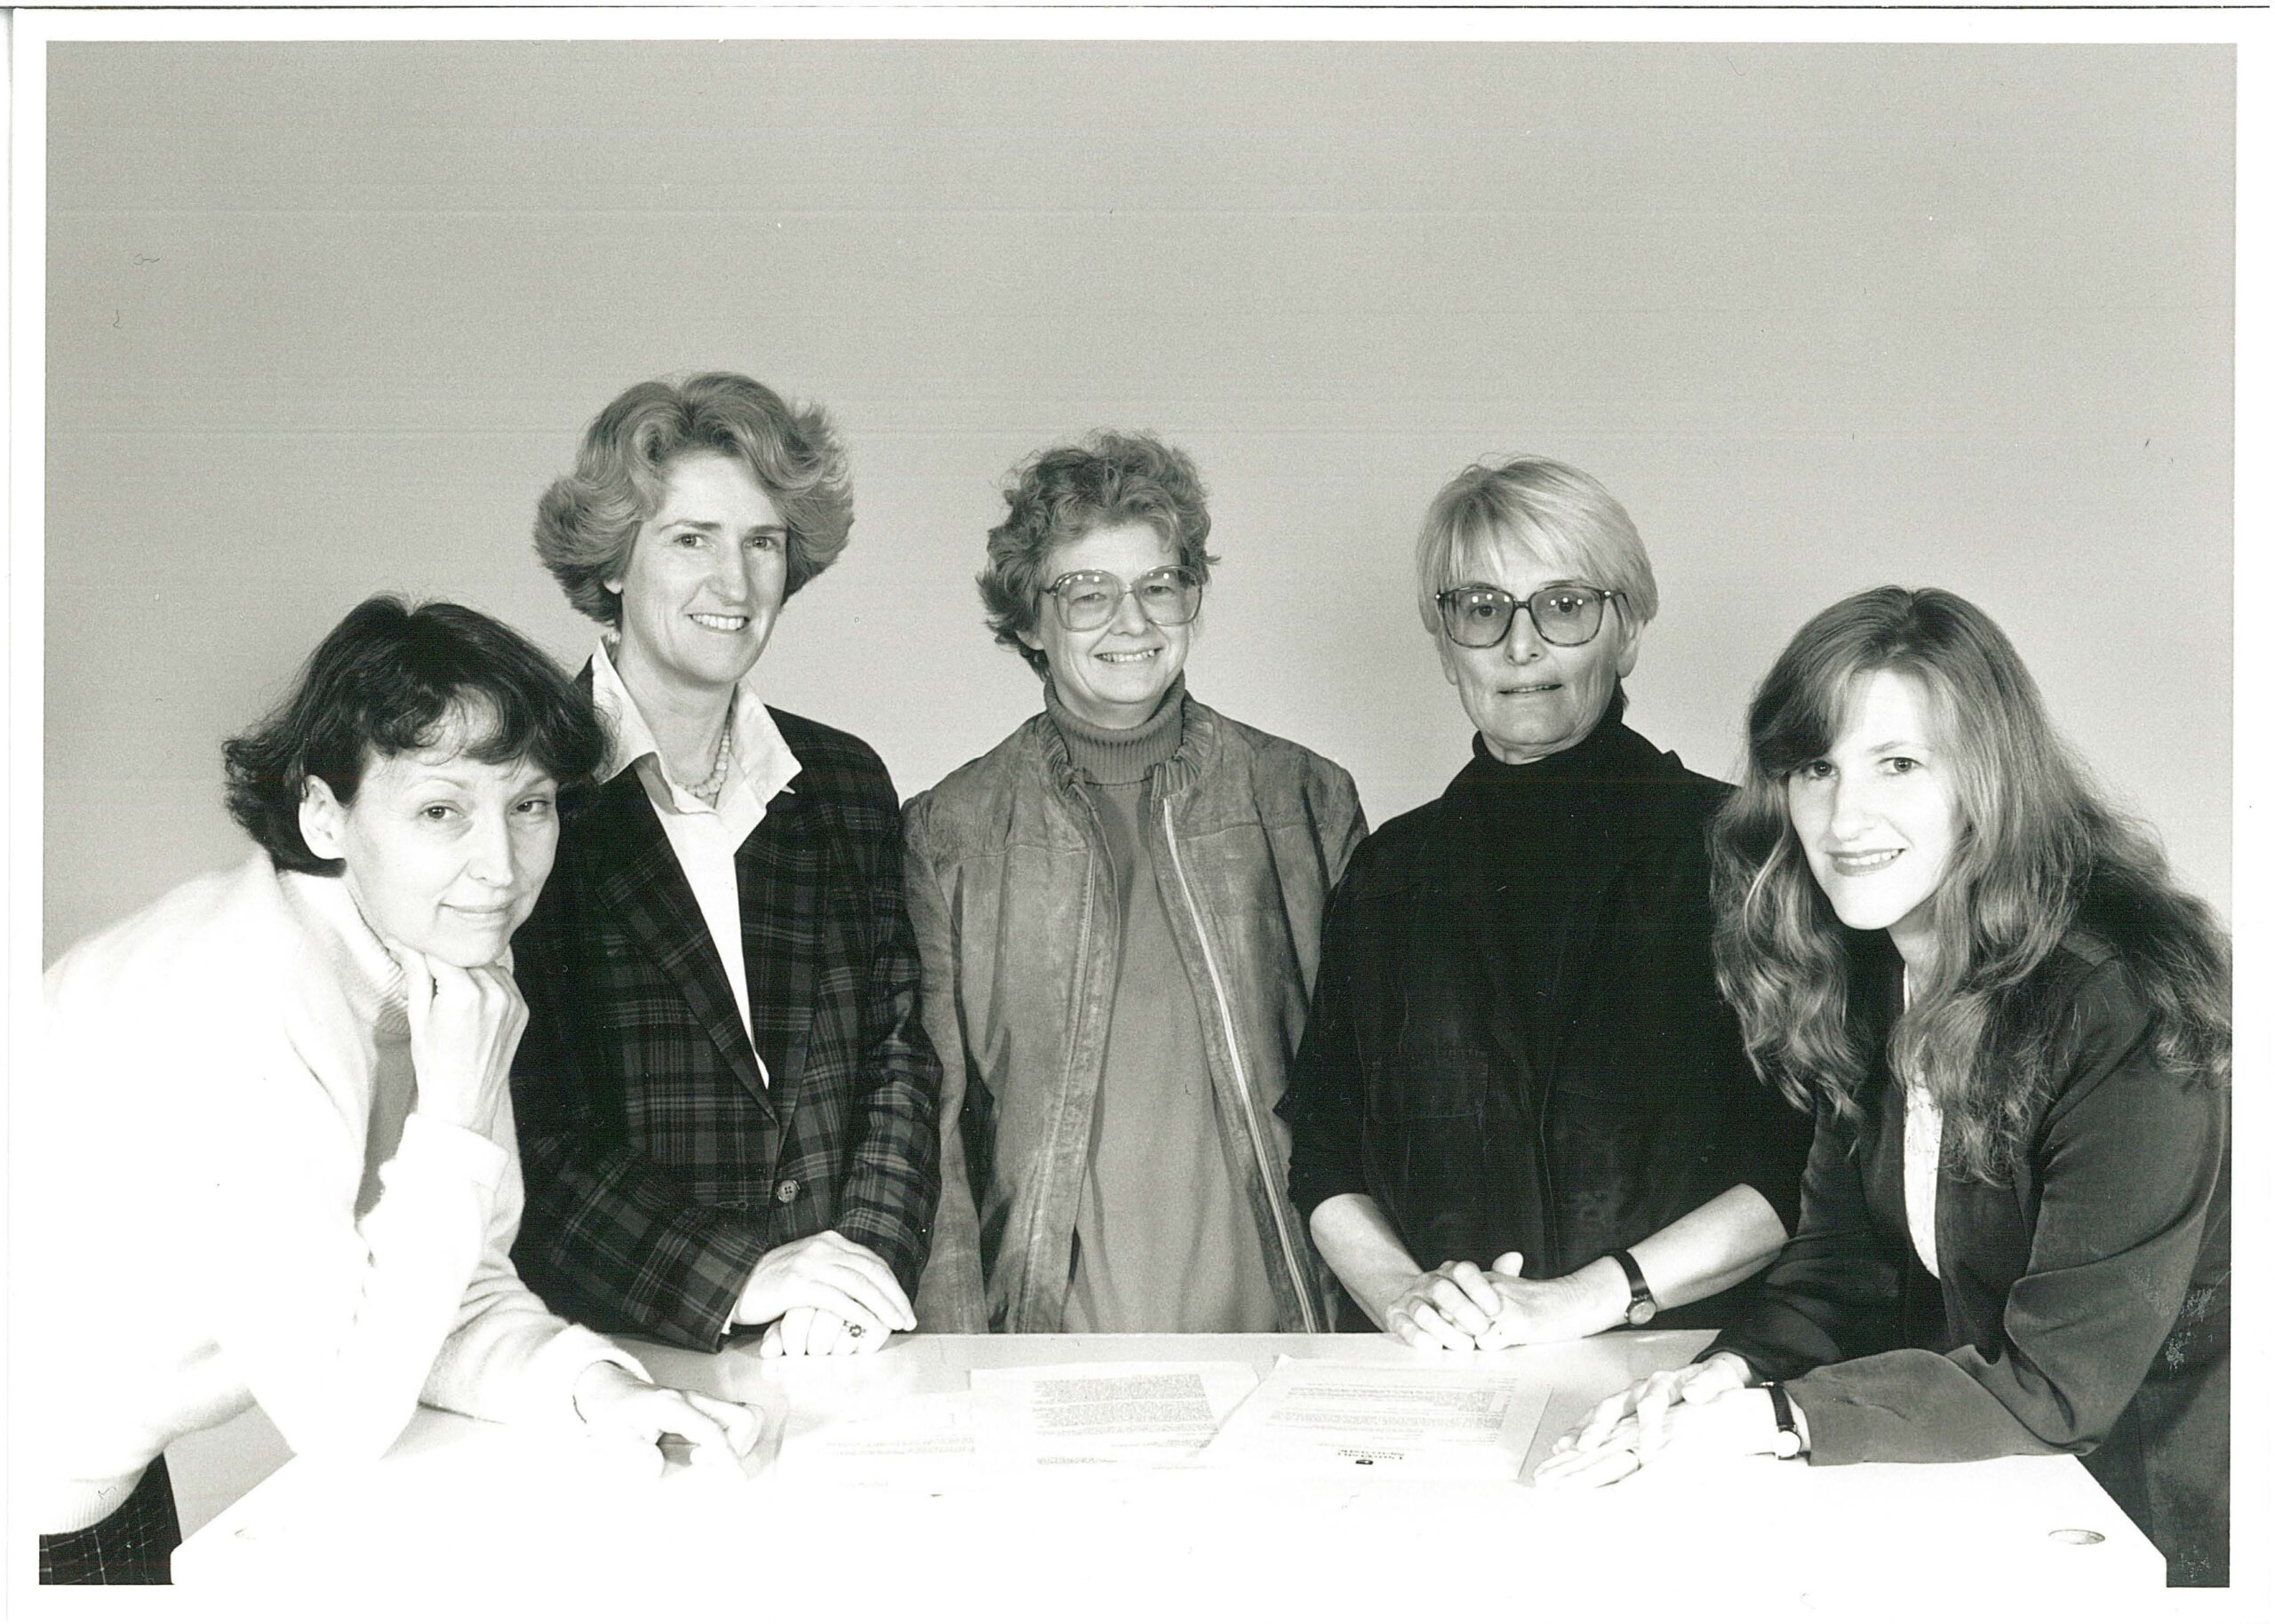 Black and white photograph of Wendy Brown, Margot Schofield, Annette Dobson, Lois Bryson, Julie Byles gathered around a table.